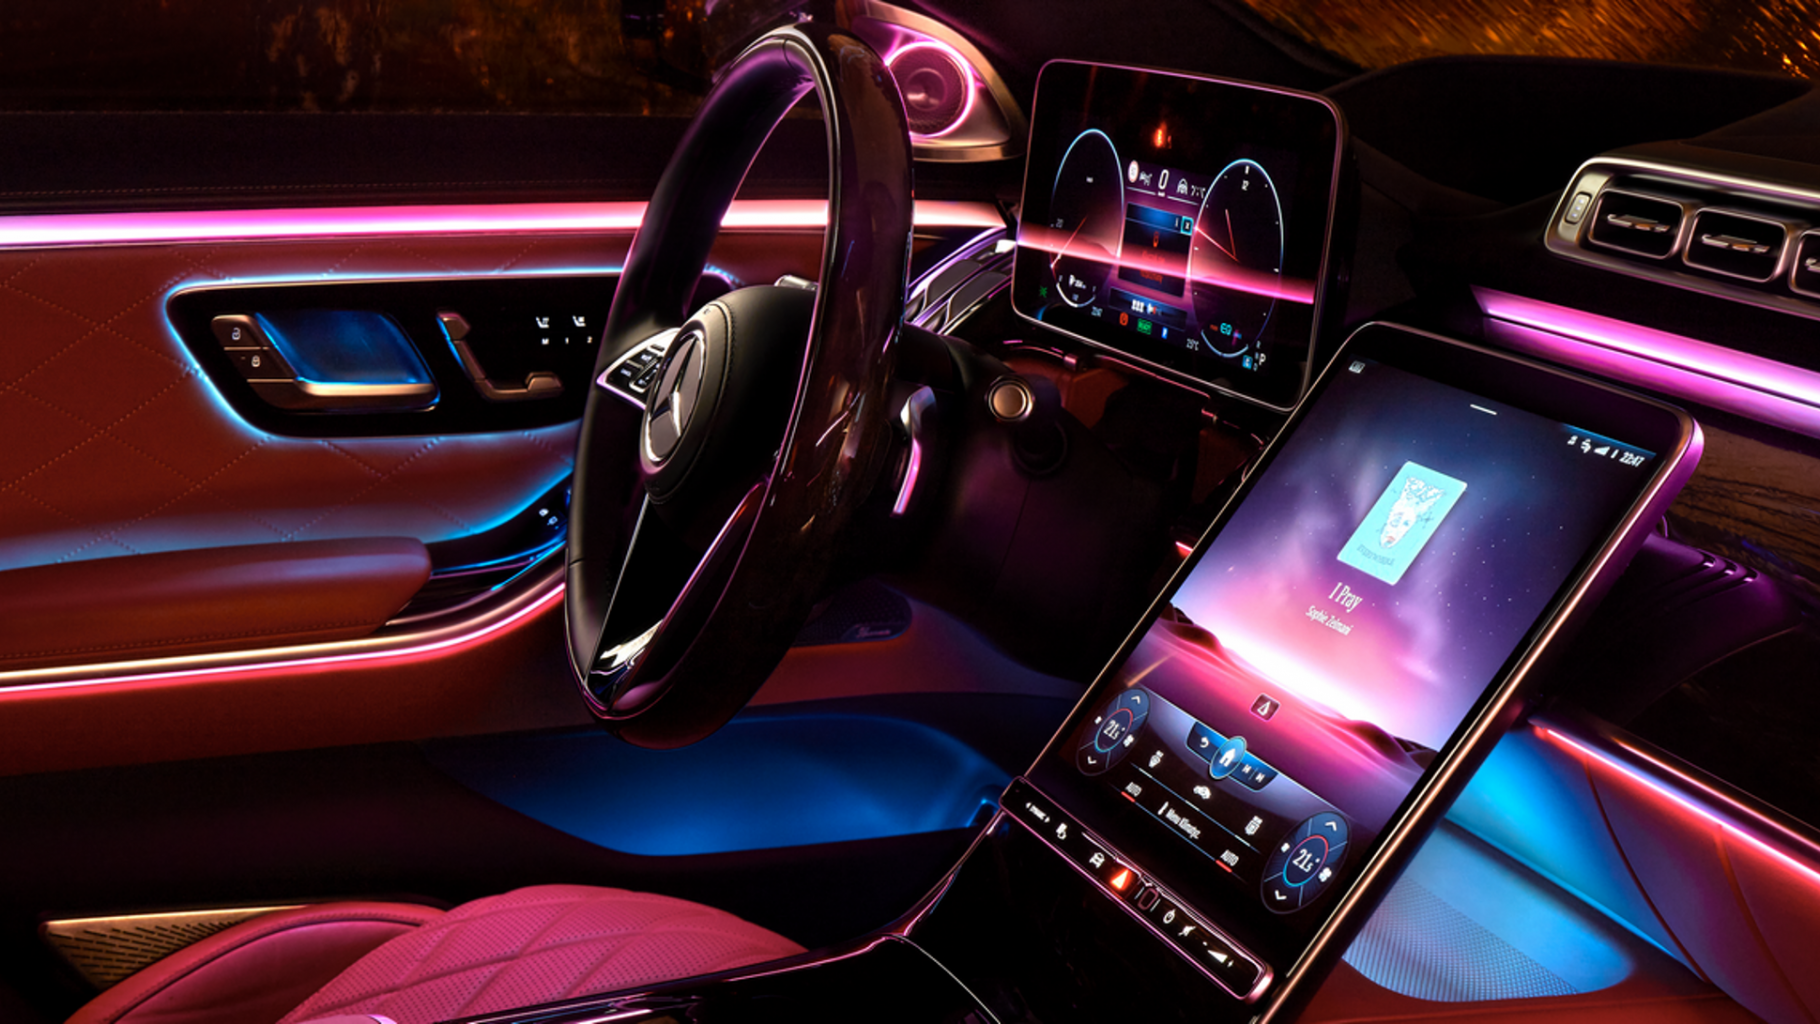 Asteelflash to Showcase Integrated Supply Chain Solution for Car Interior Lighting at Electronica